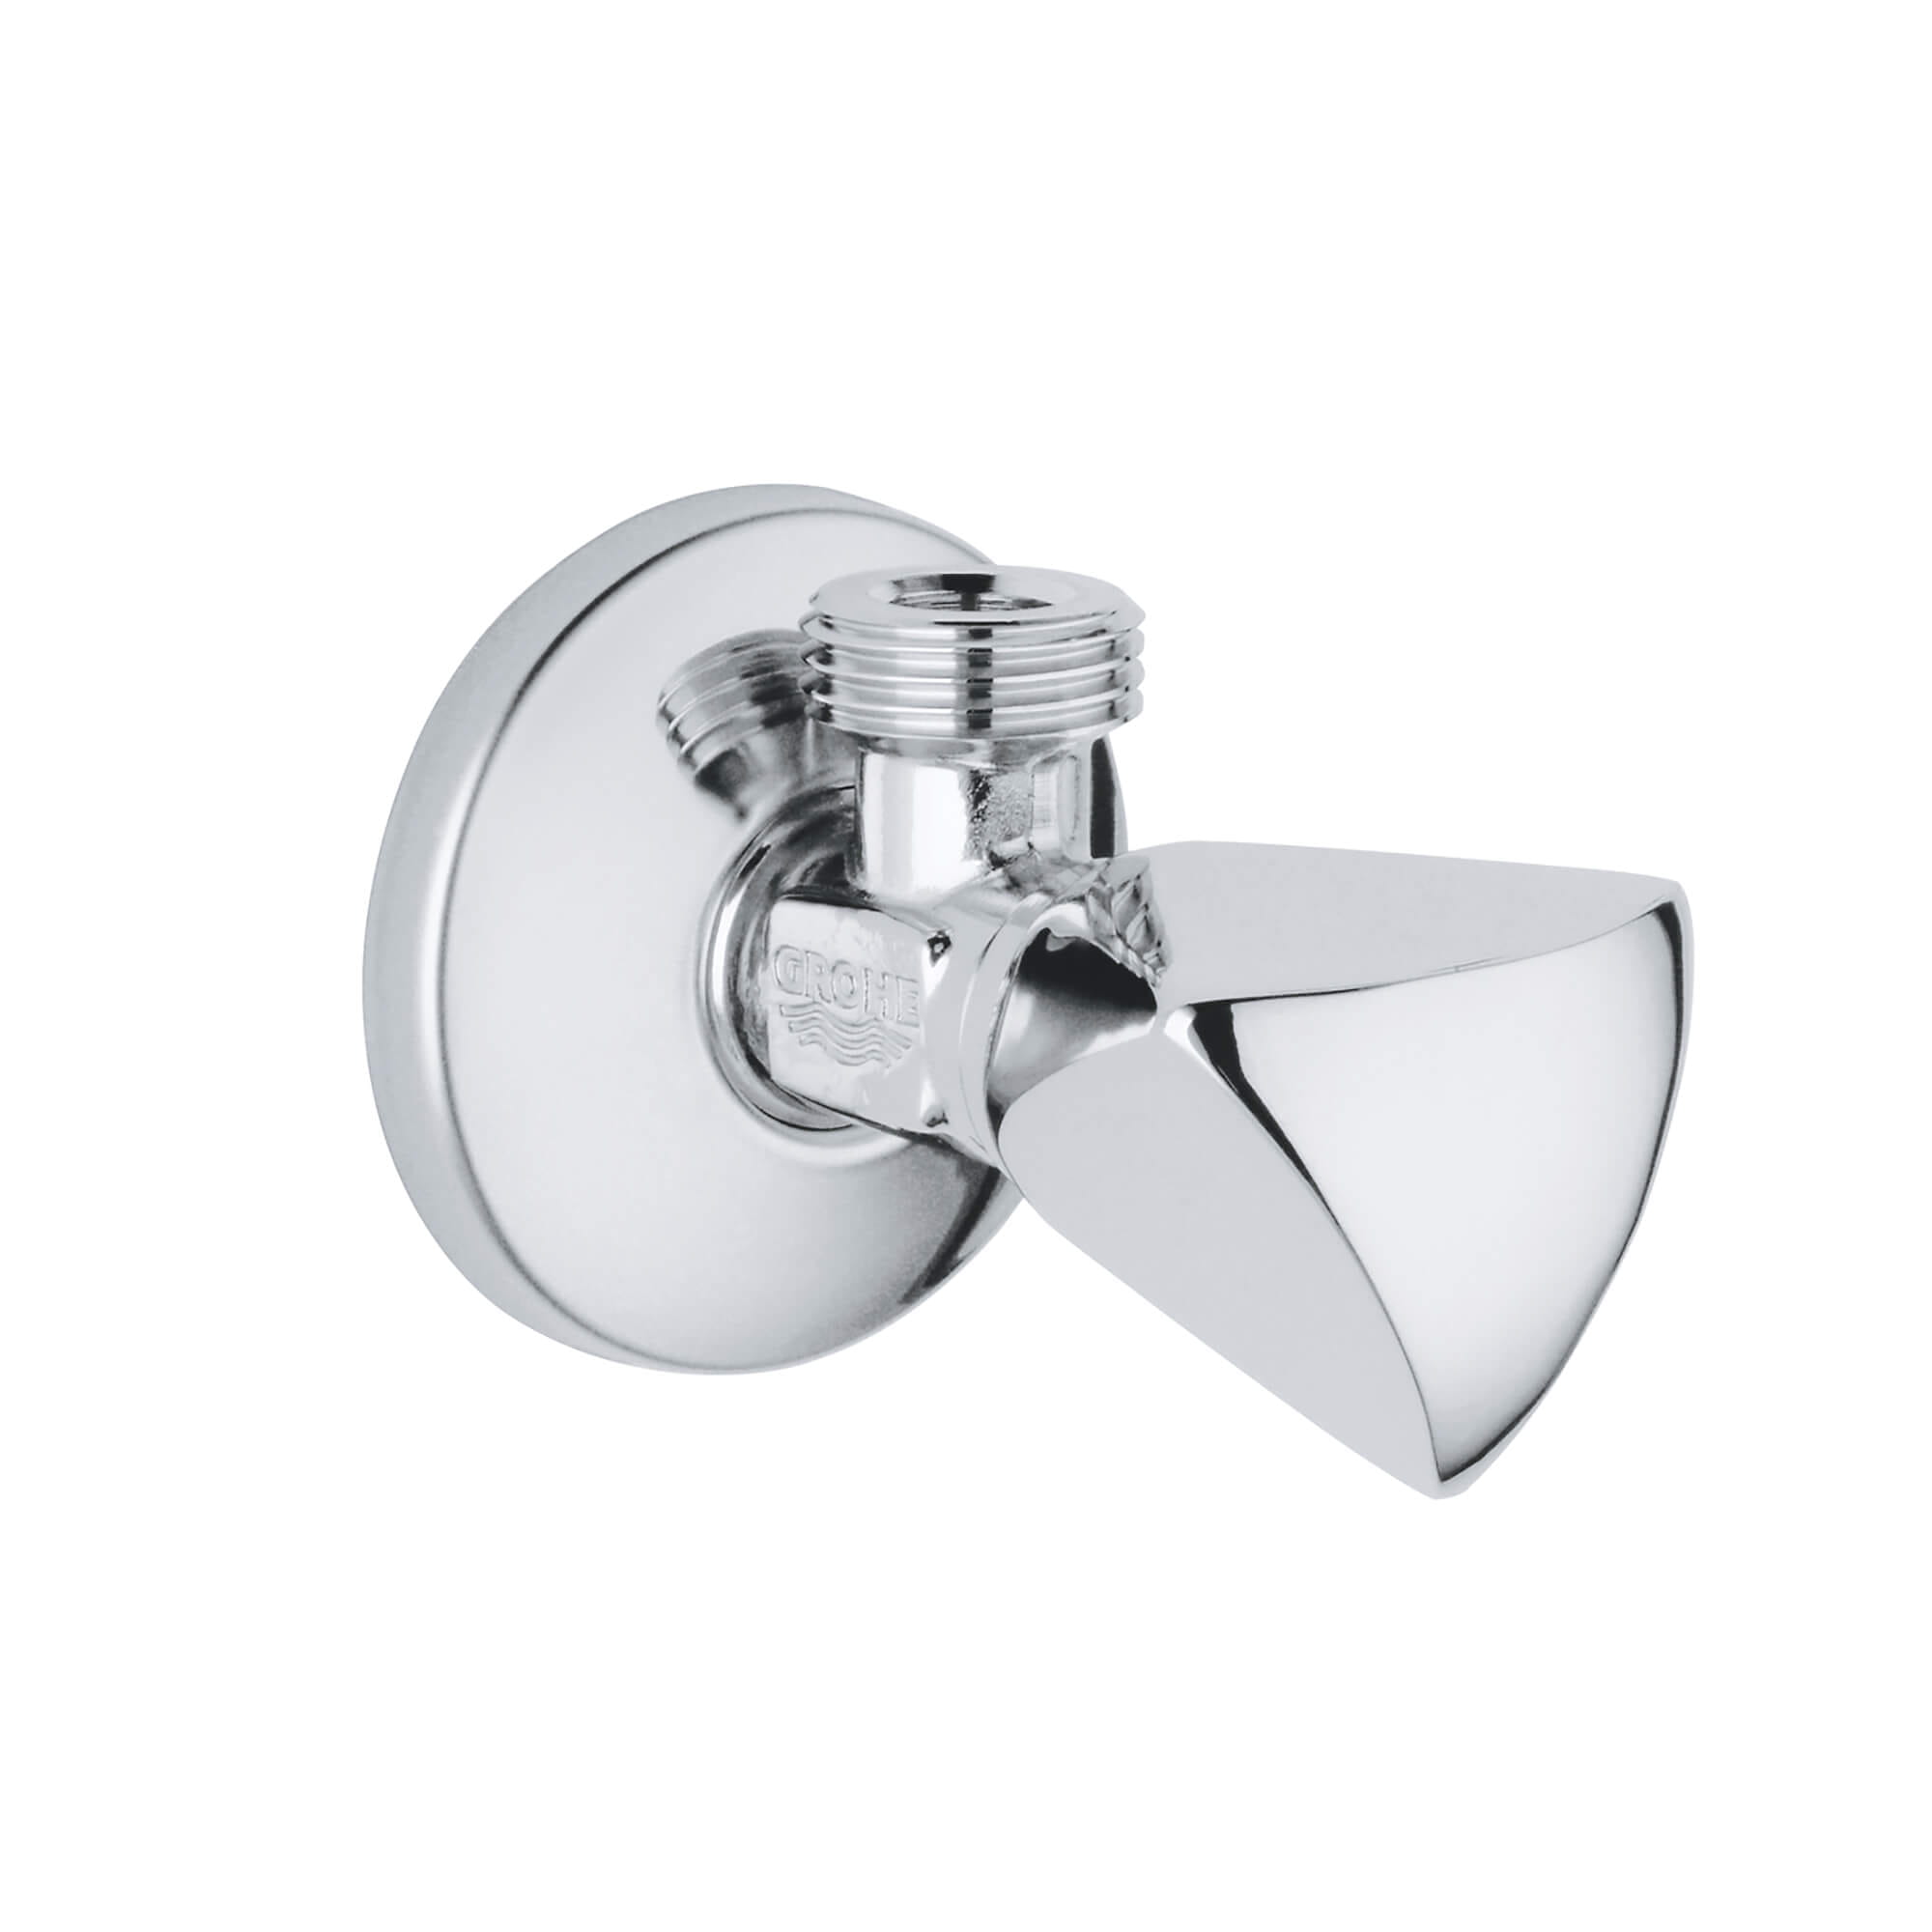 GROHE 22032000 1/2 x 1/2 angle valve wall tap 